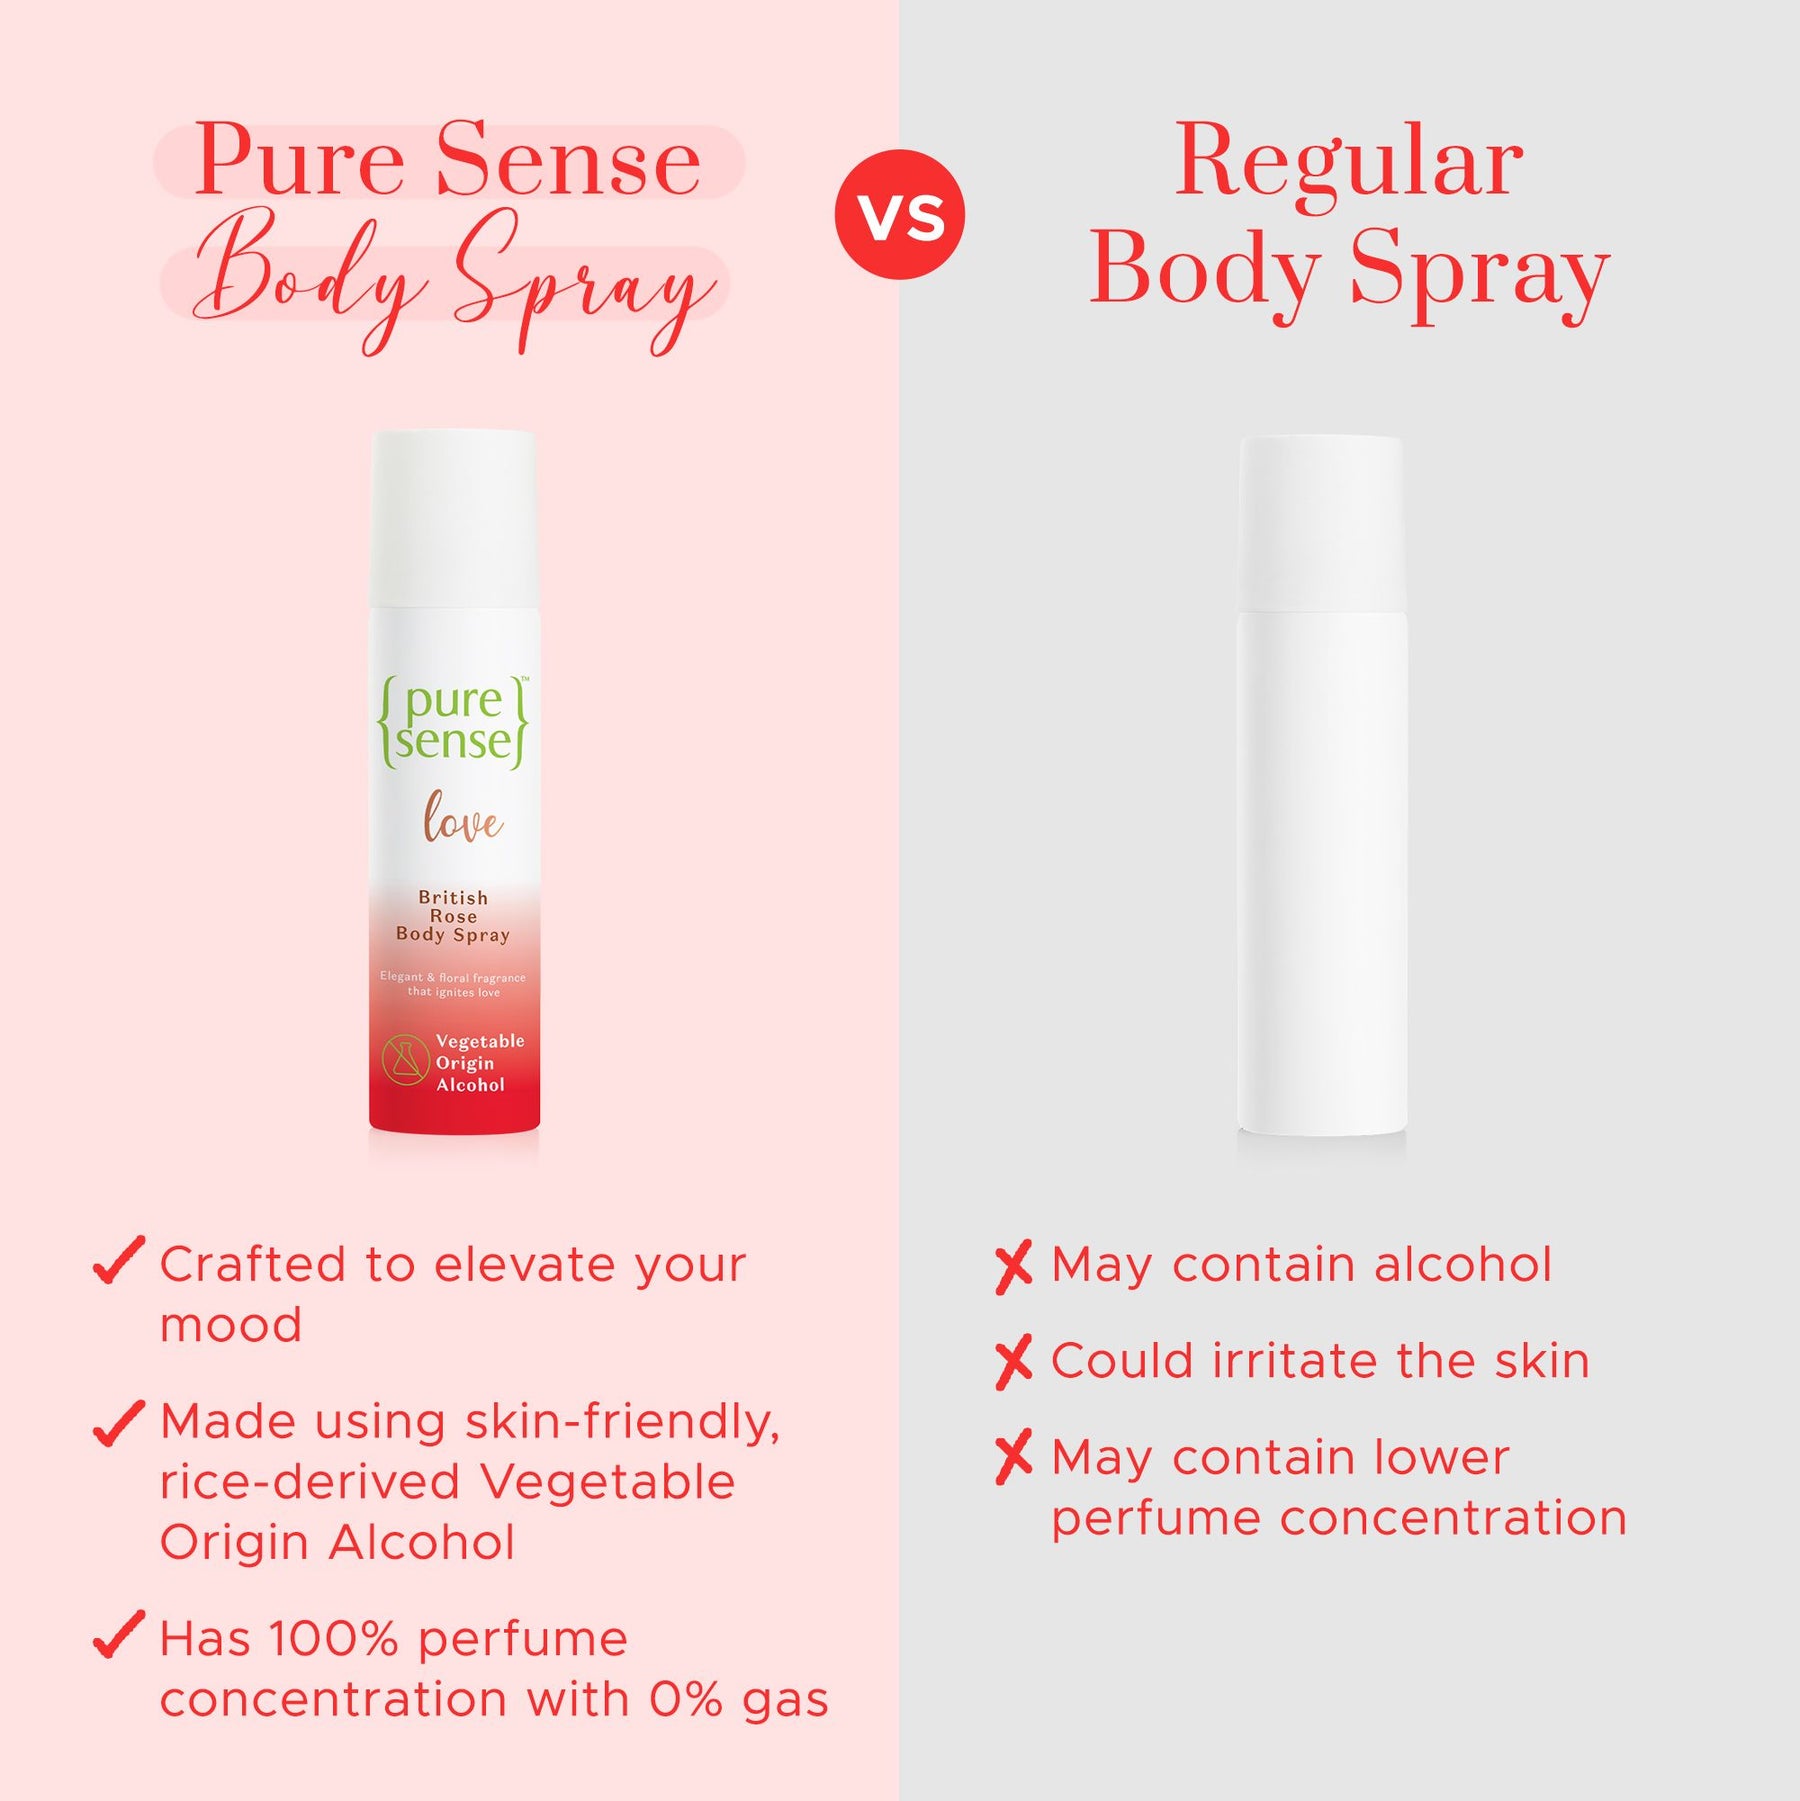 [CRED] Love British Rose Body Spray | From the makers of Parachute Advansed | 150ml - PureSense